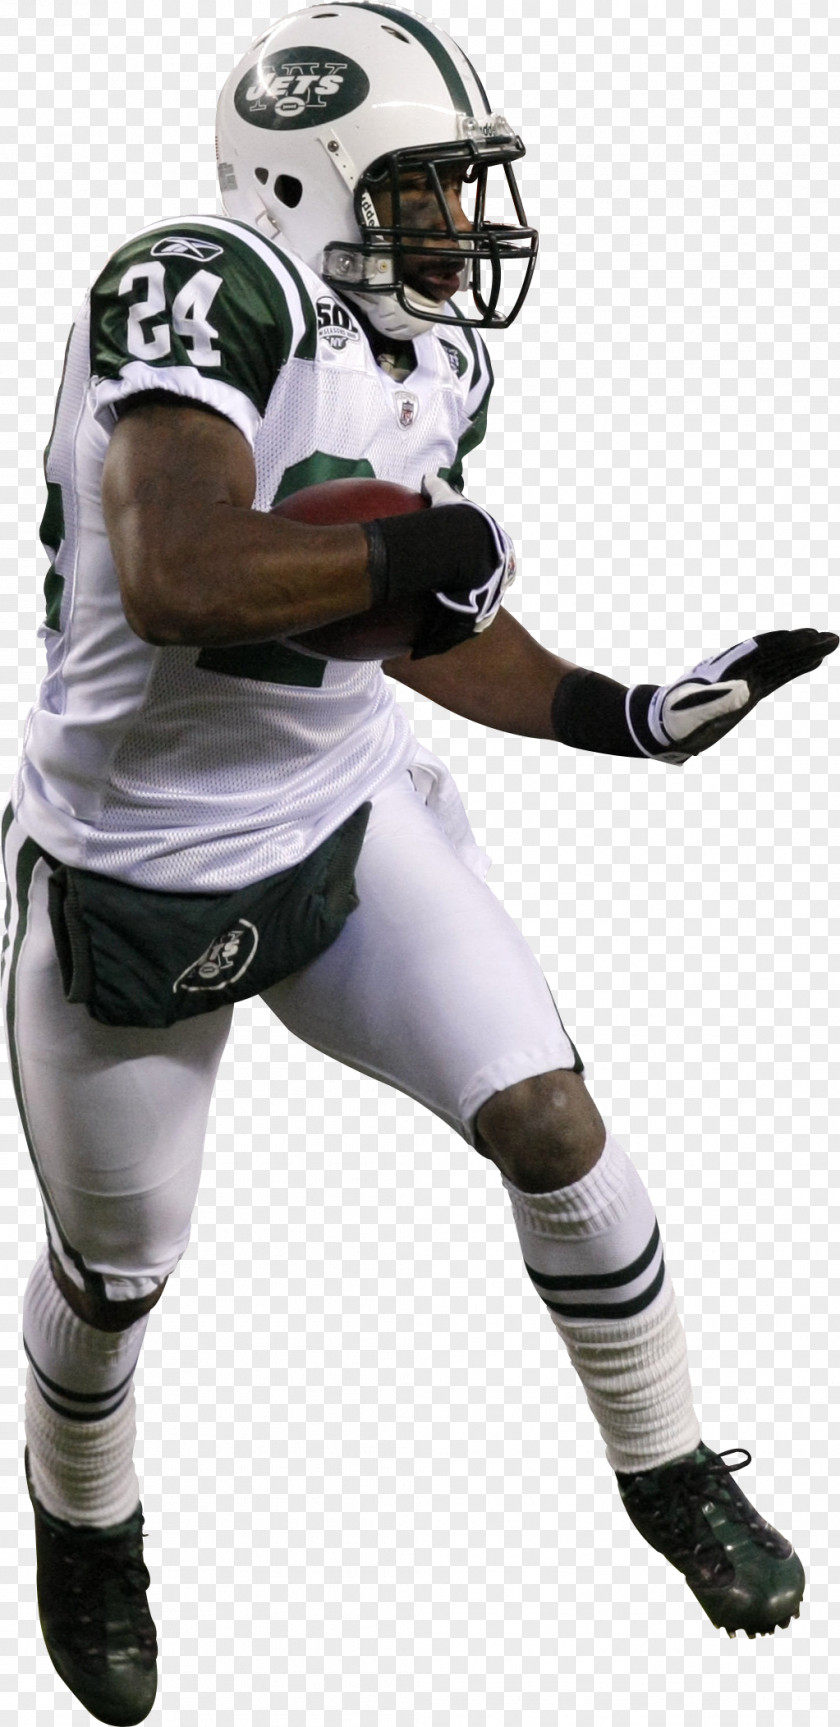 American Football Face Mask Helmets Logos And Uniforms Of The New York Jets PNG